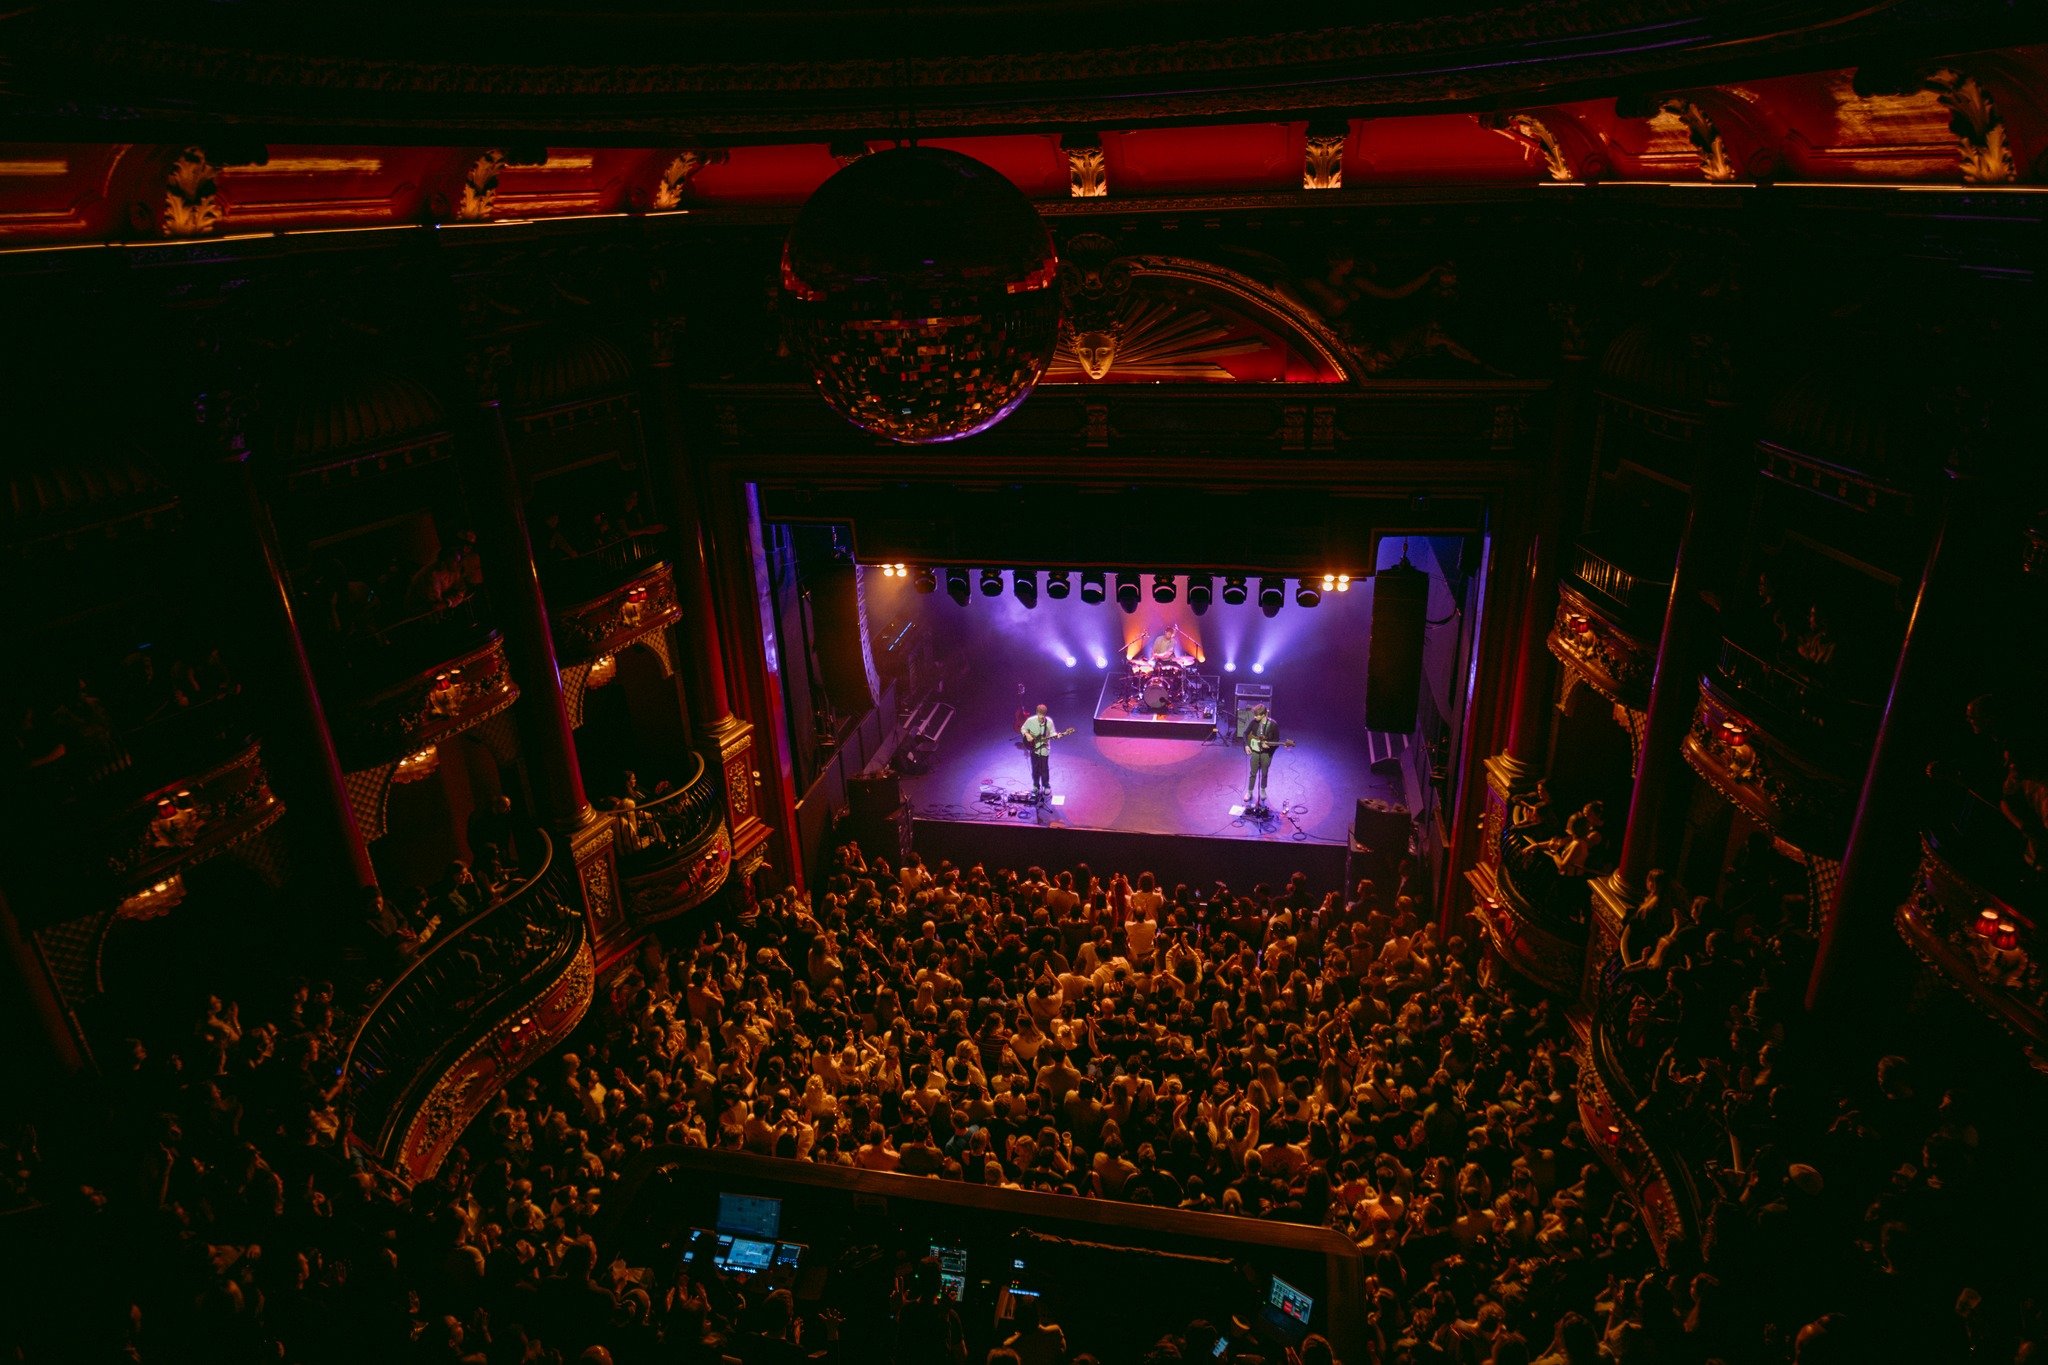 Beatenberg (@beatenberg_band) brought their sound to London's KOKO (@kokoelectronic) with the help of zeck (@zeckmusic). 

Read and see the full gallery via the link in bio. All images by @ikerrkreative. 

-
-
#gigreview #beatenberg #livereview #zeck